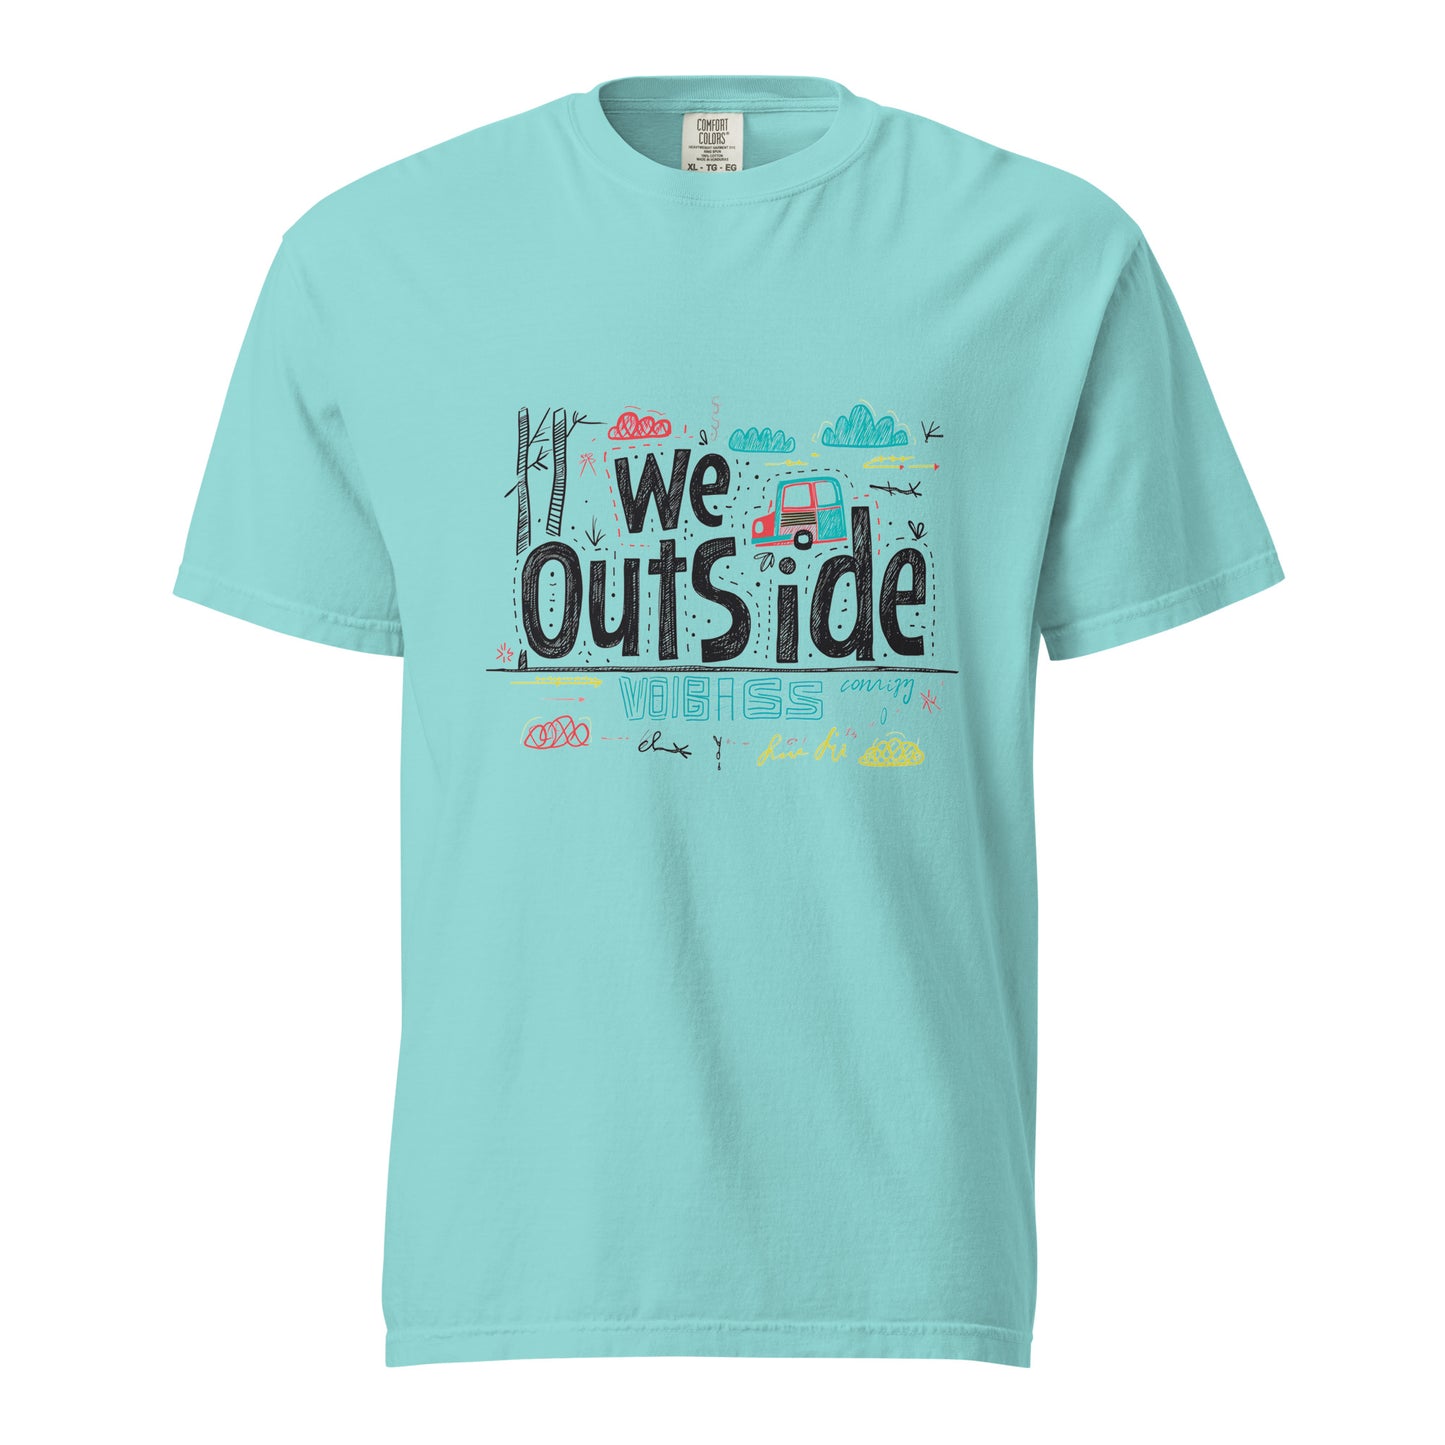 WE OUT SIDE - Unisex garment-dyed heavyweight t-shirt